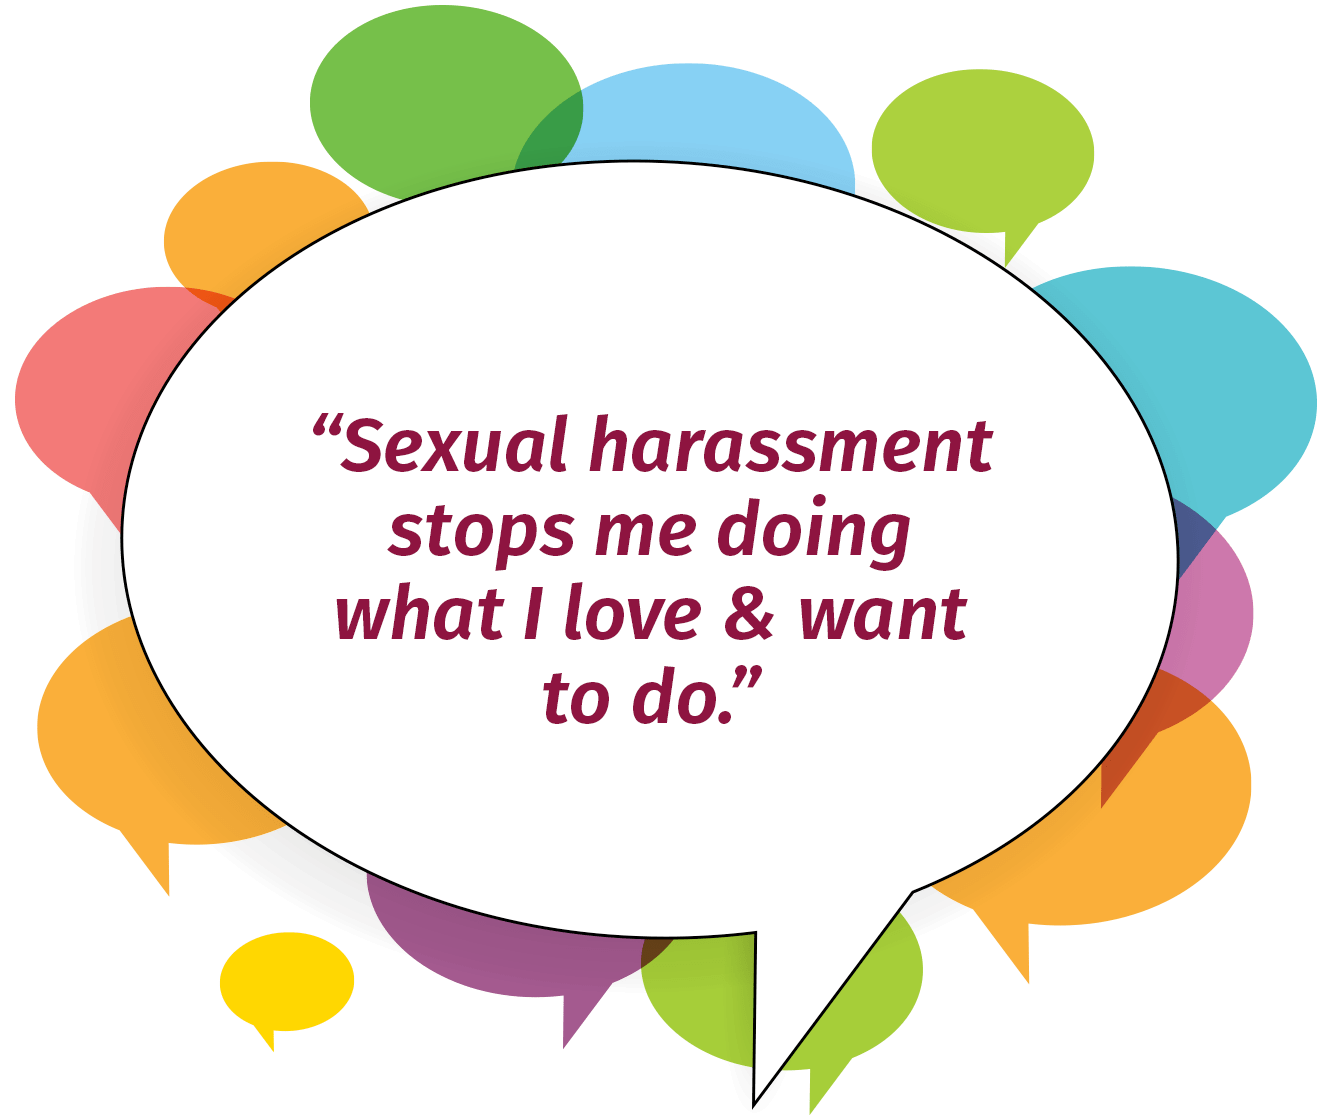 Sexual harassment stops me doing what I love & want to do.